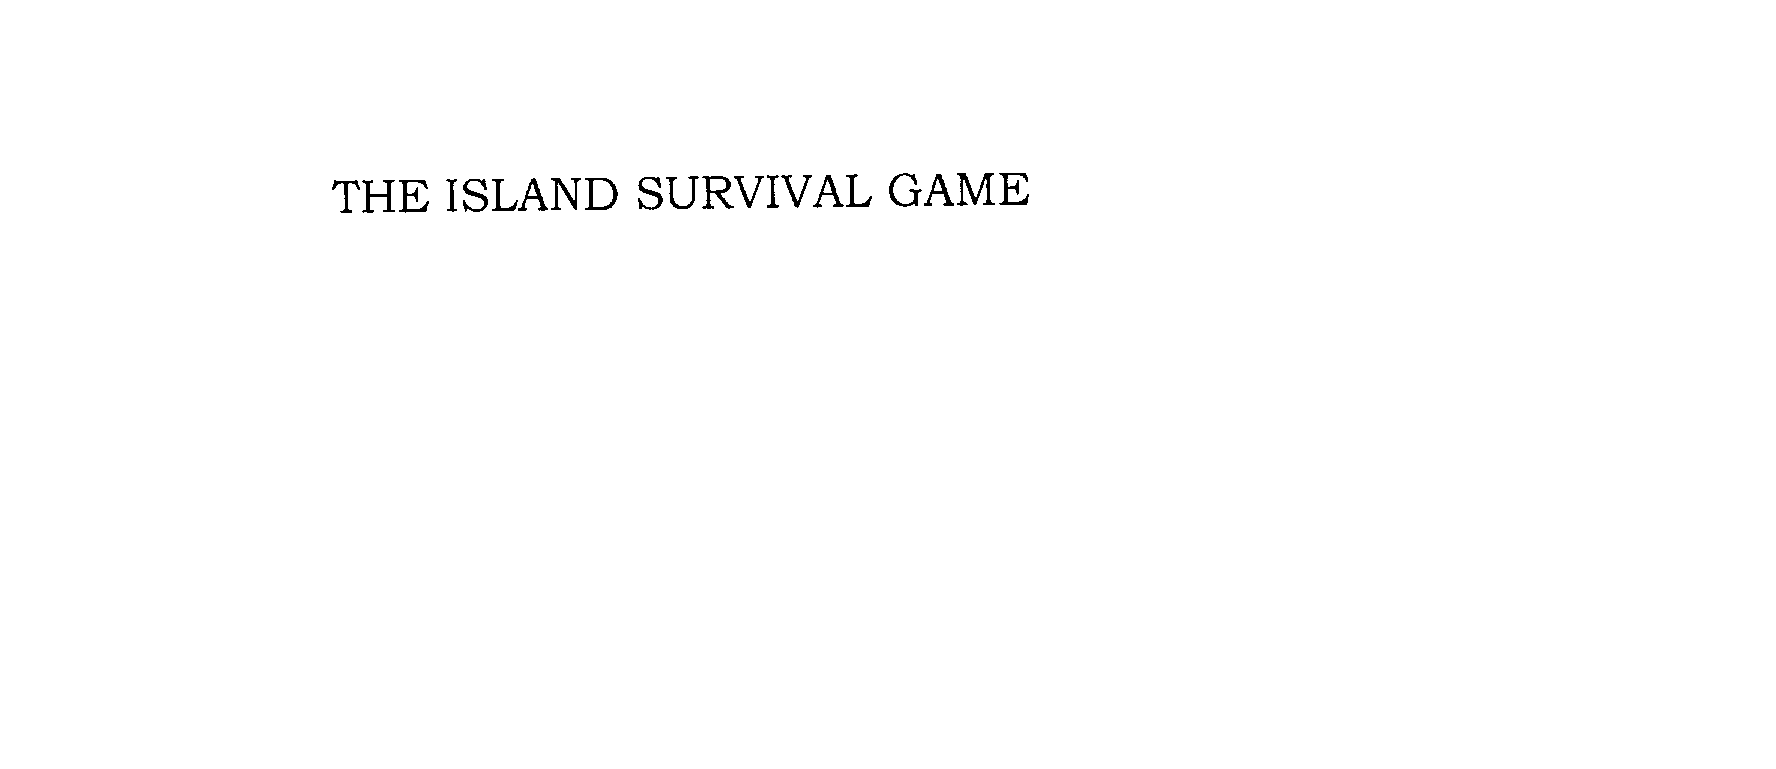  THE ISLAND SURVIVAL GAME